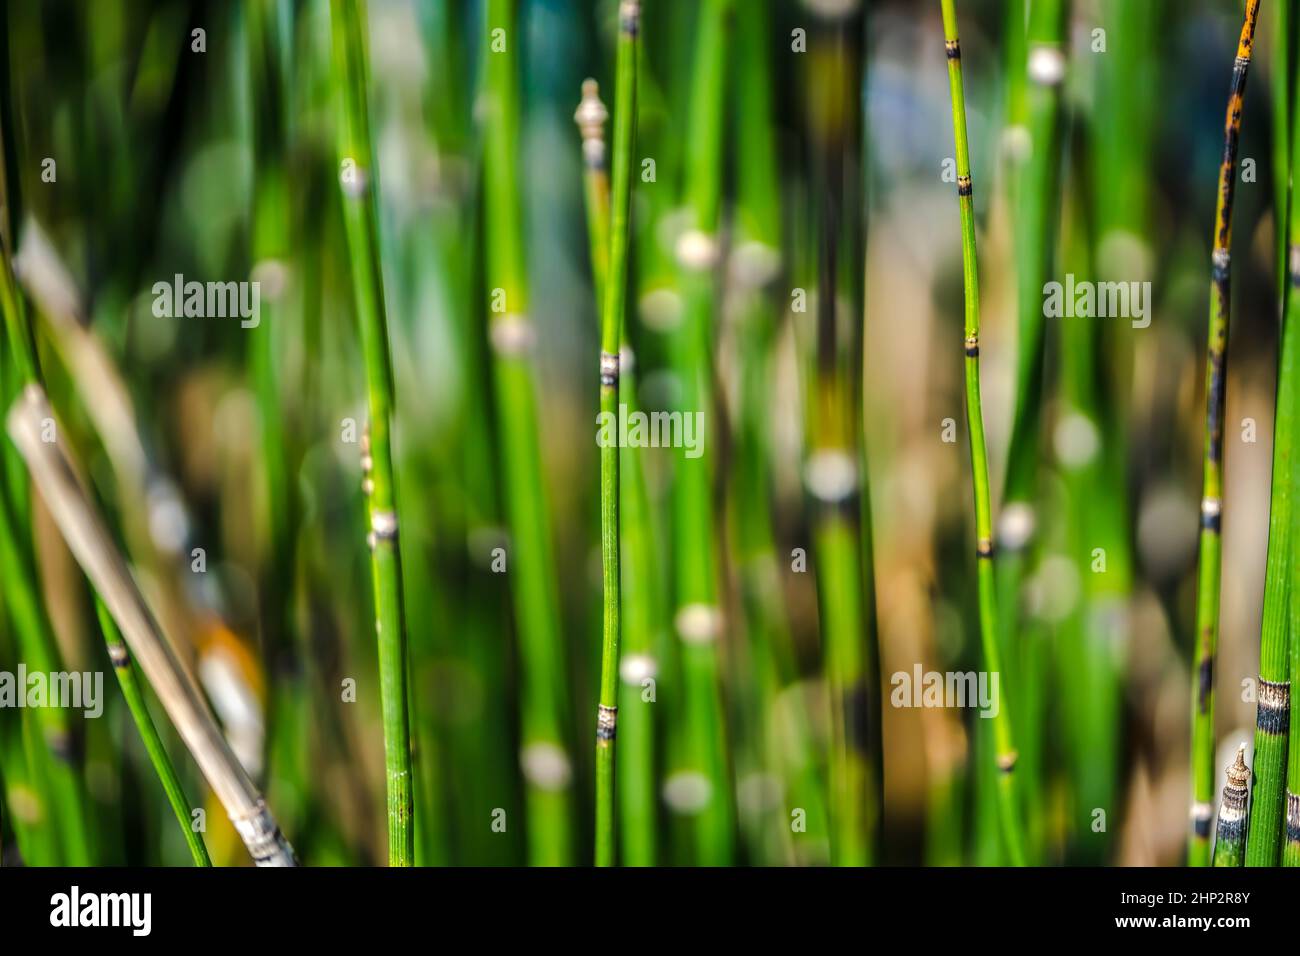 Abstract background with the image of green marsh plant sprouts - Horsetail wintering growing. Stock Photo